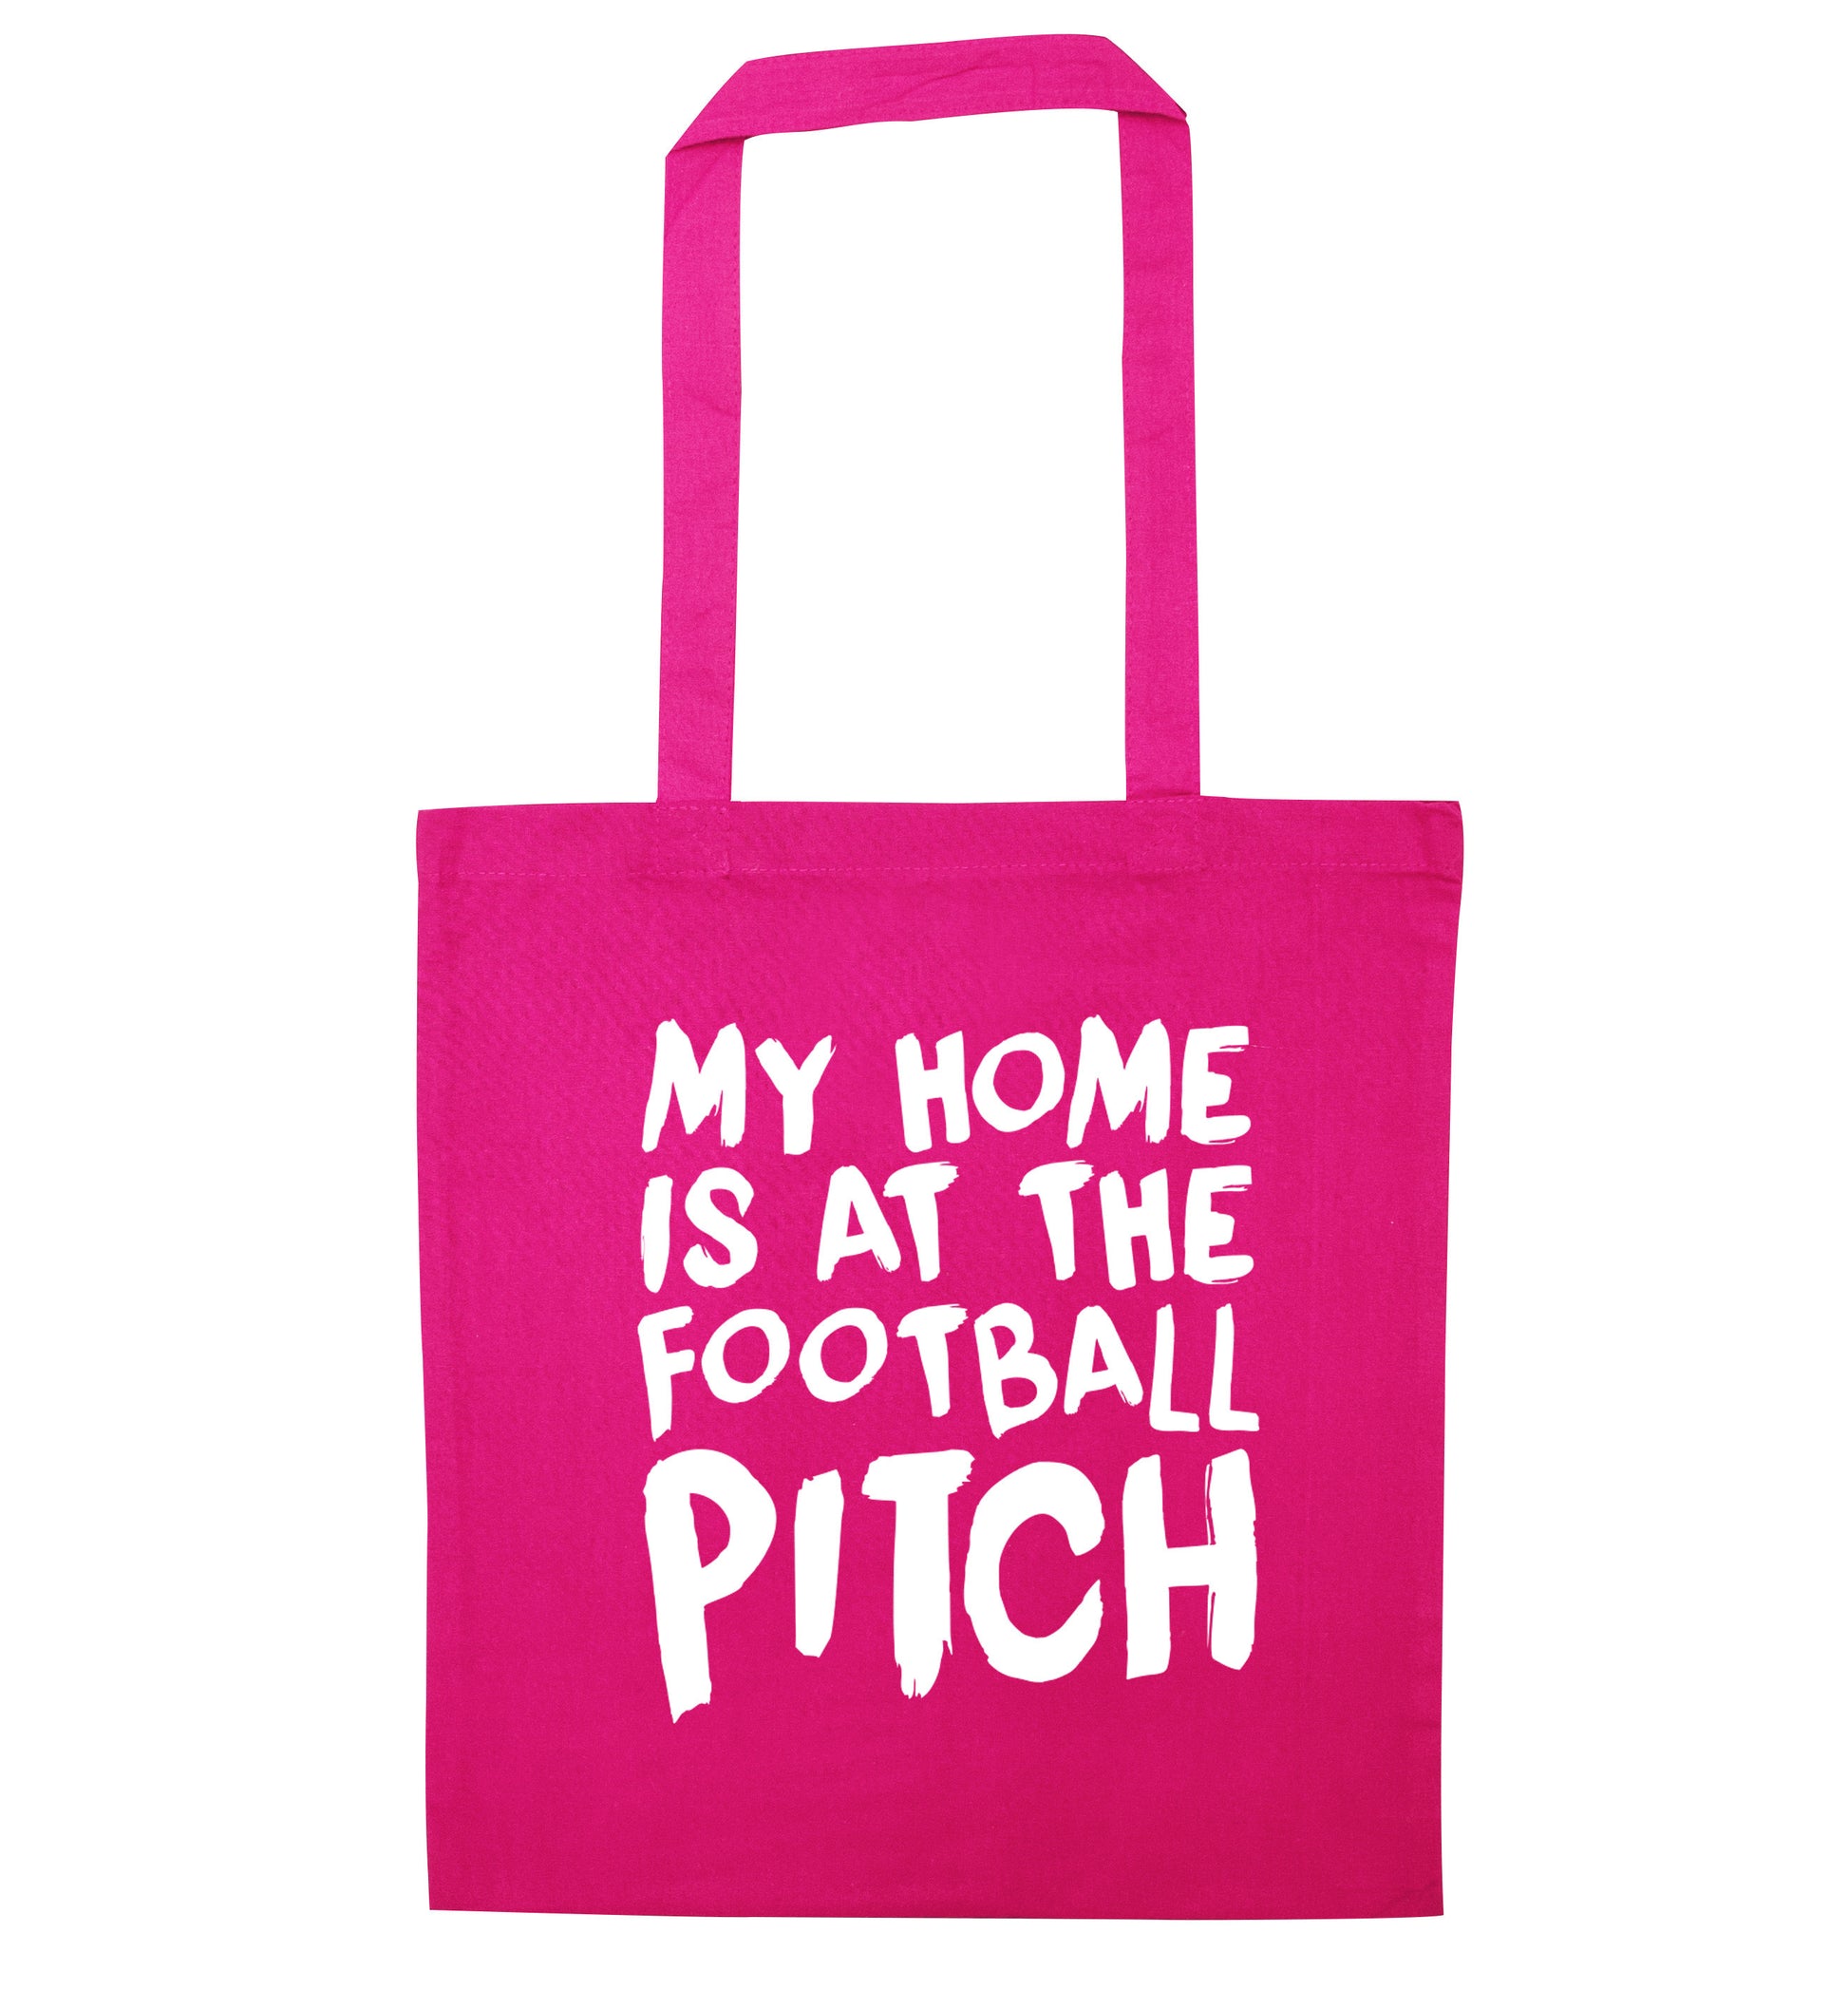 My home is at the football pitch pink tote bag